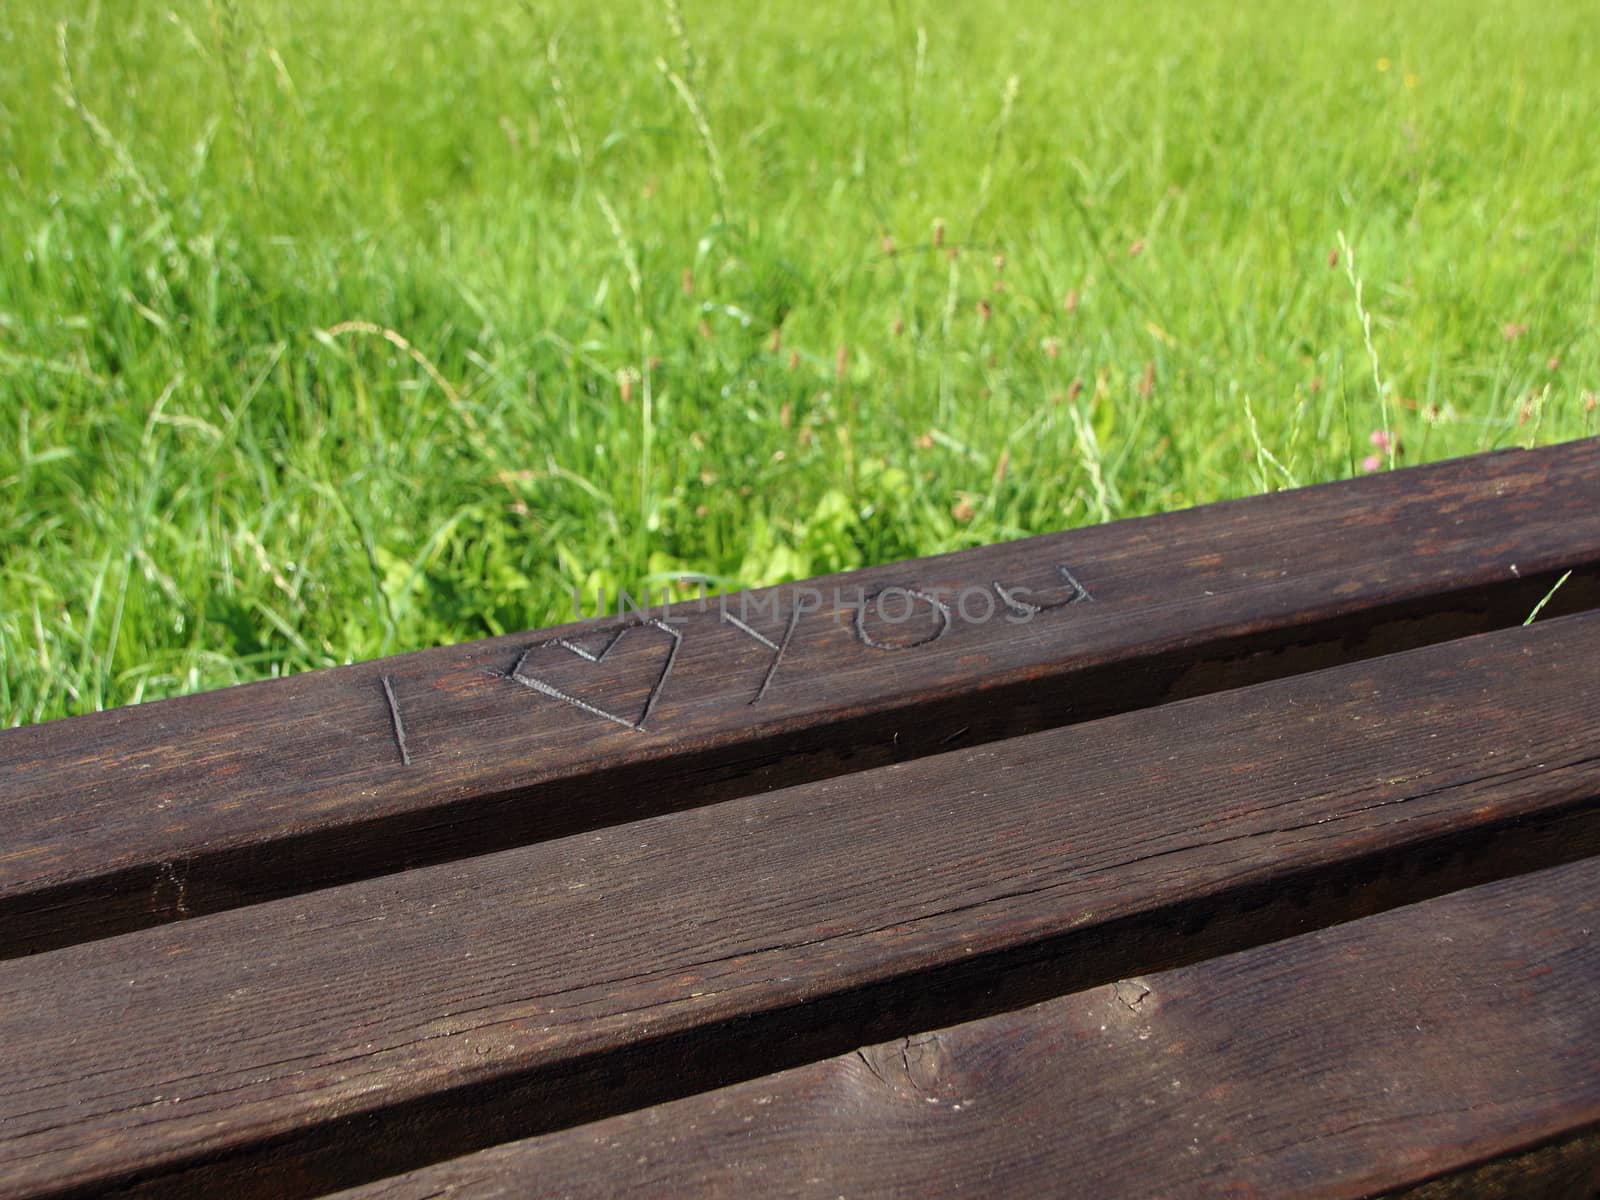 I Love You with a Heart Carved into a Wooden Bench with grass background